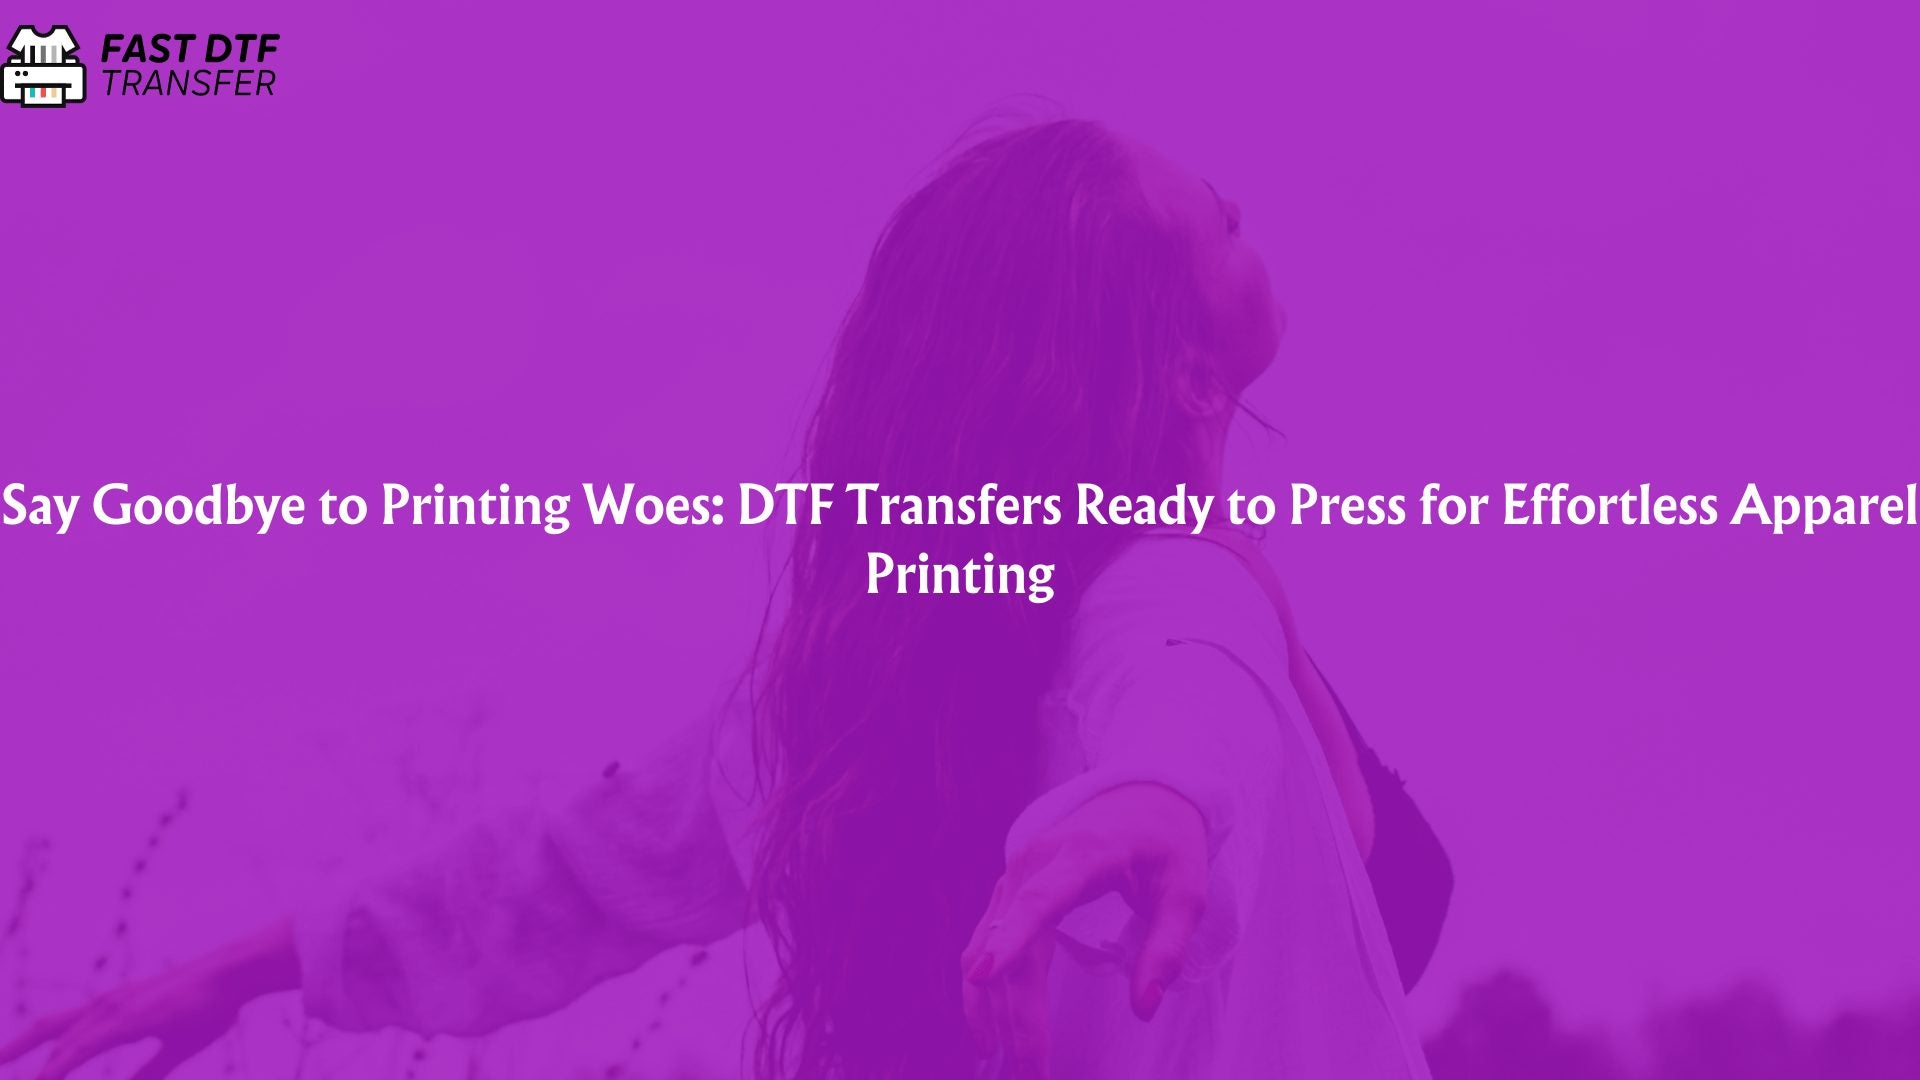 Say Goodbye to Printing Woes: DTF Transfers Ready to Press for Effortless Apparel Printing